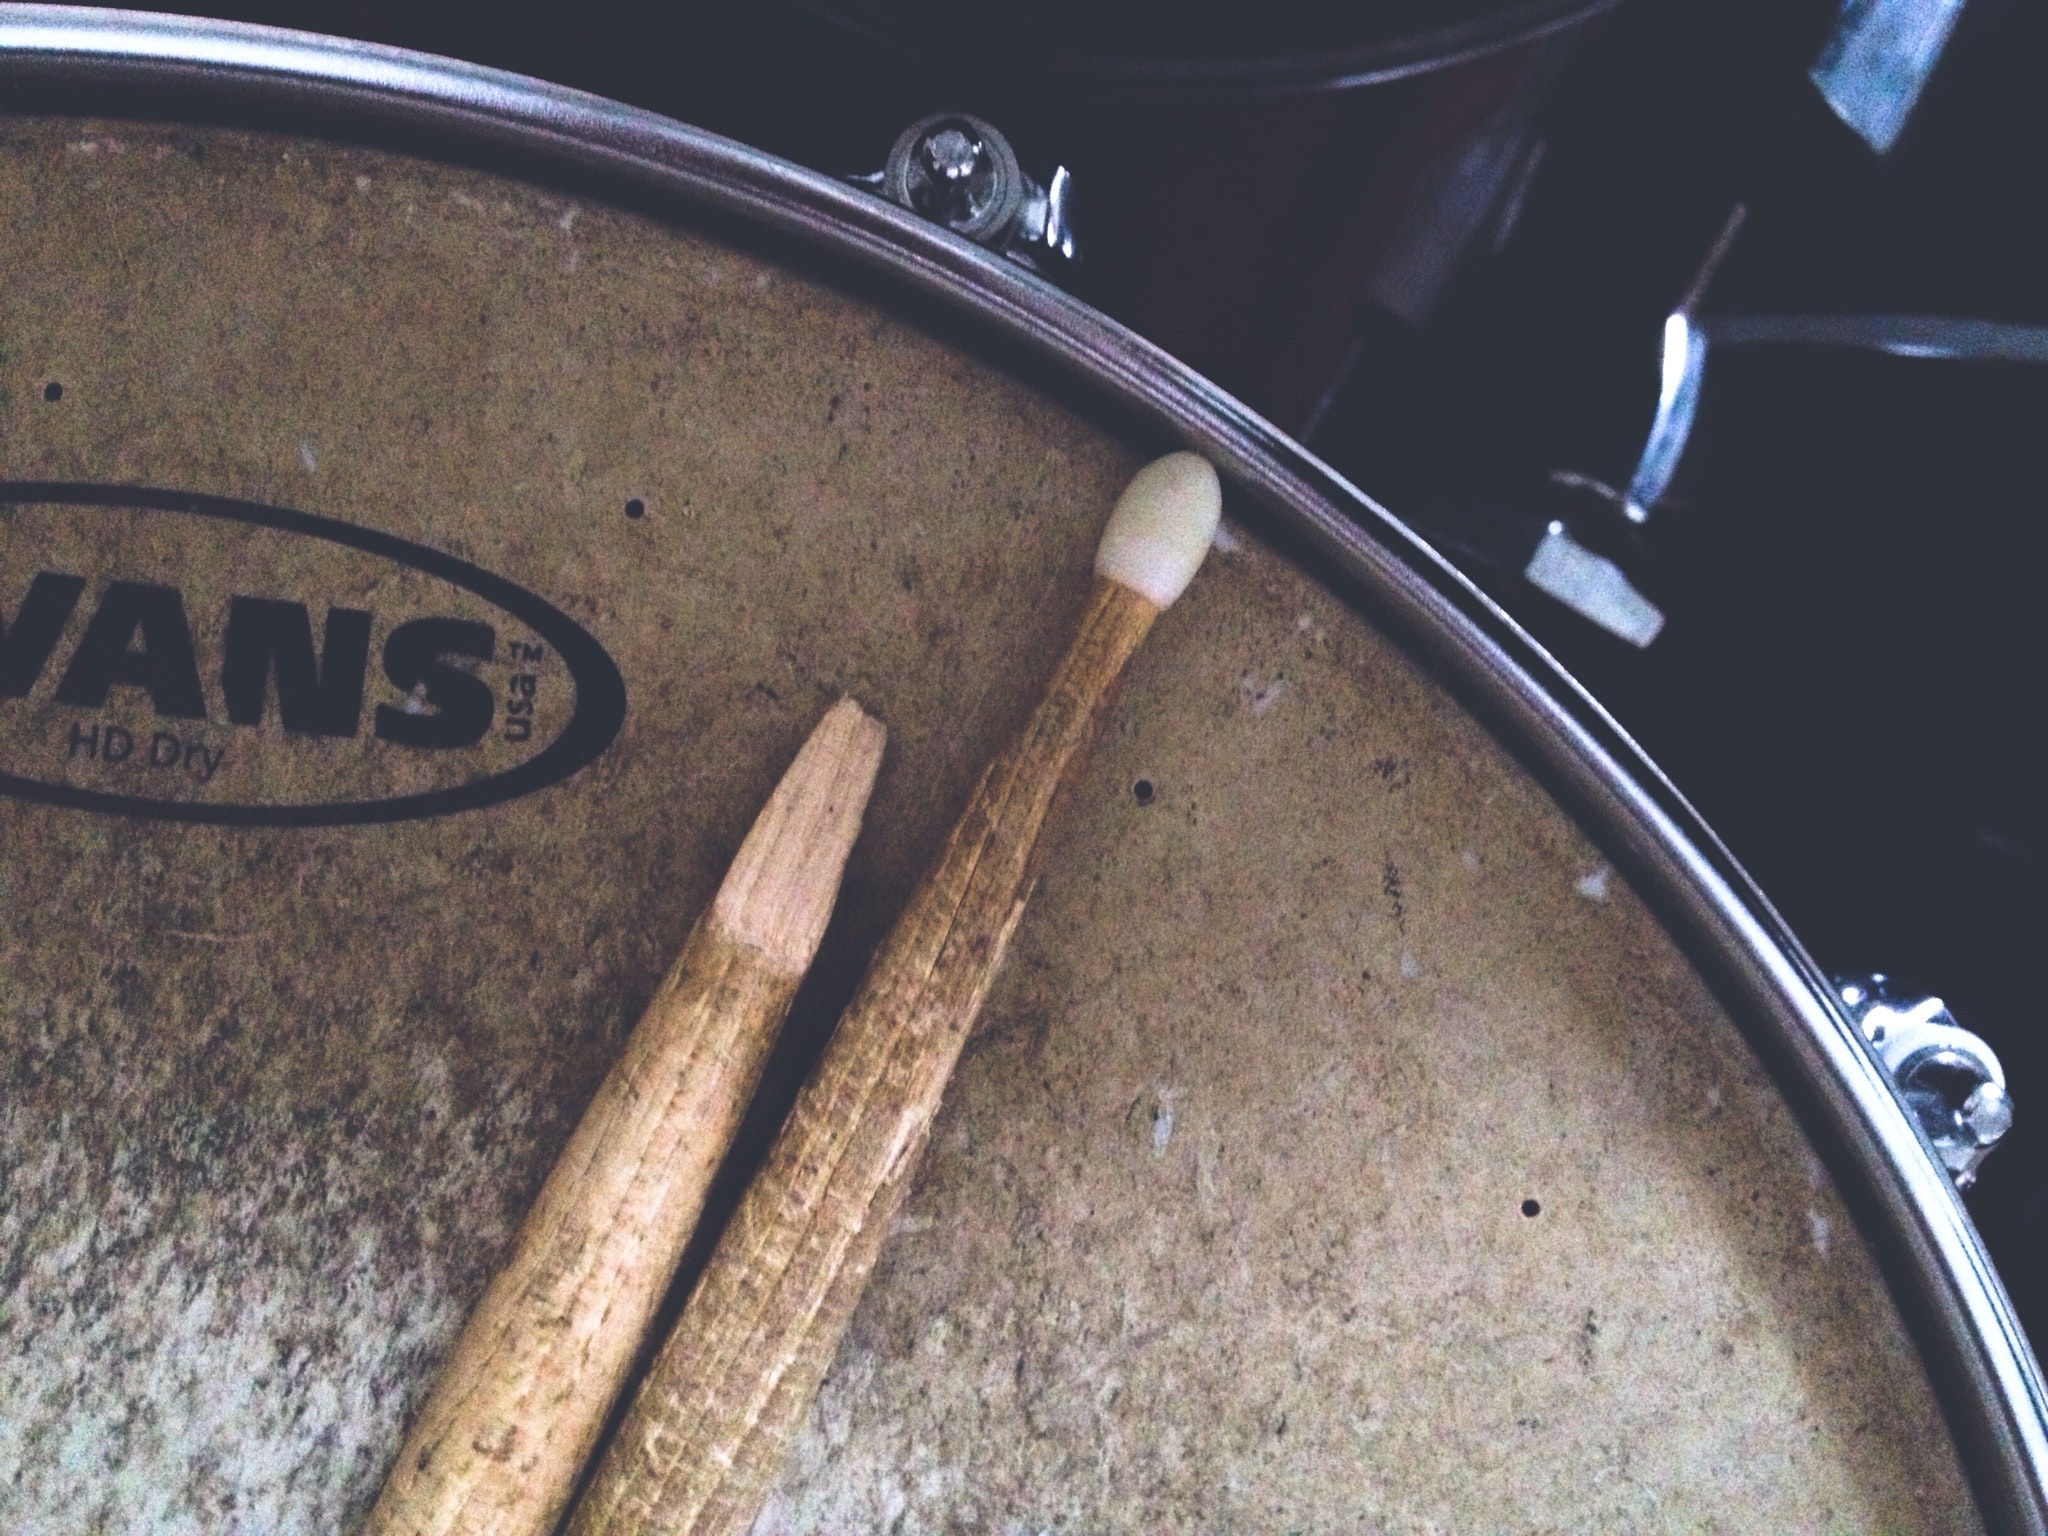 A pair of broken sticks, a common sight for drummers.